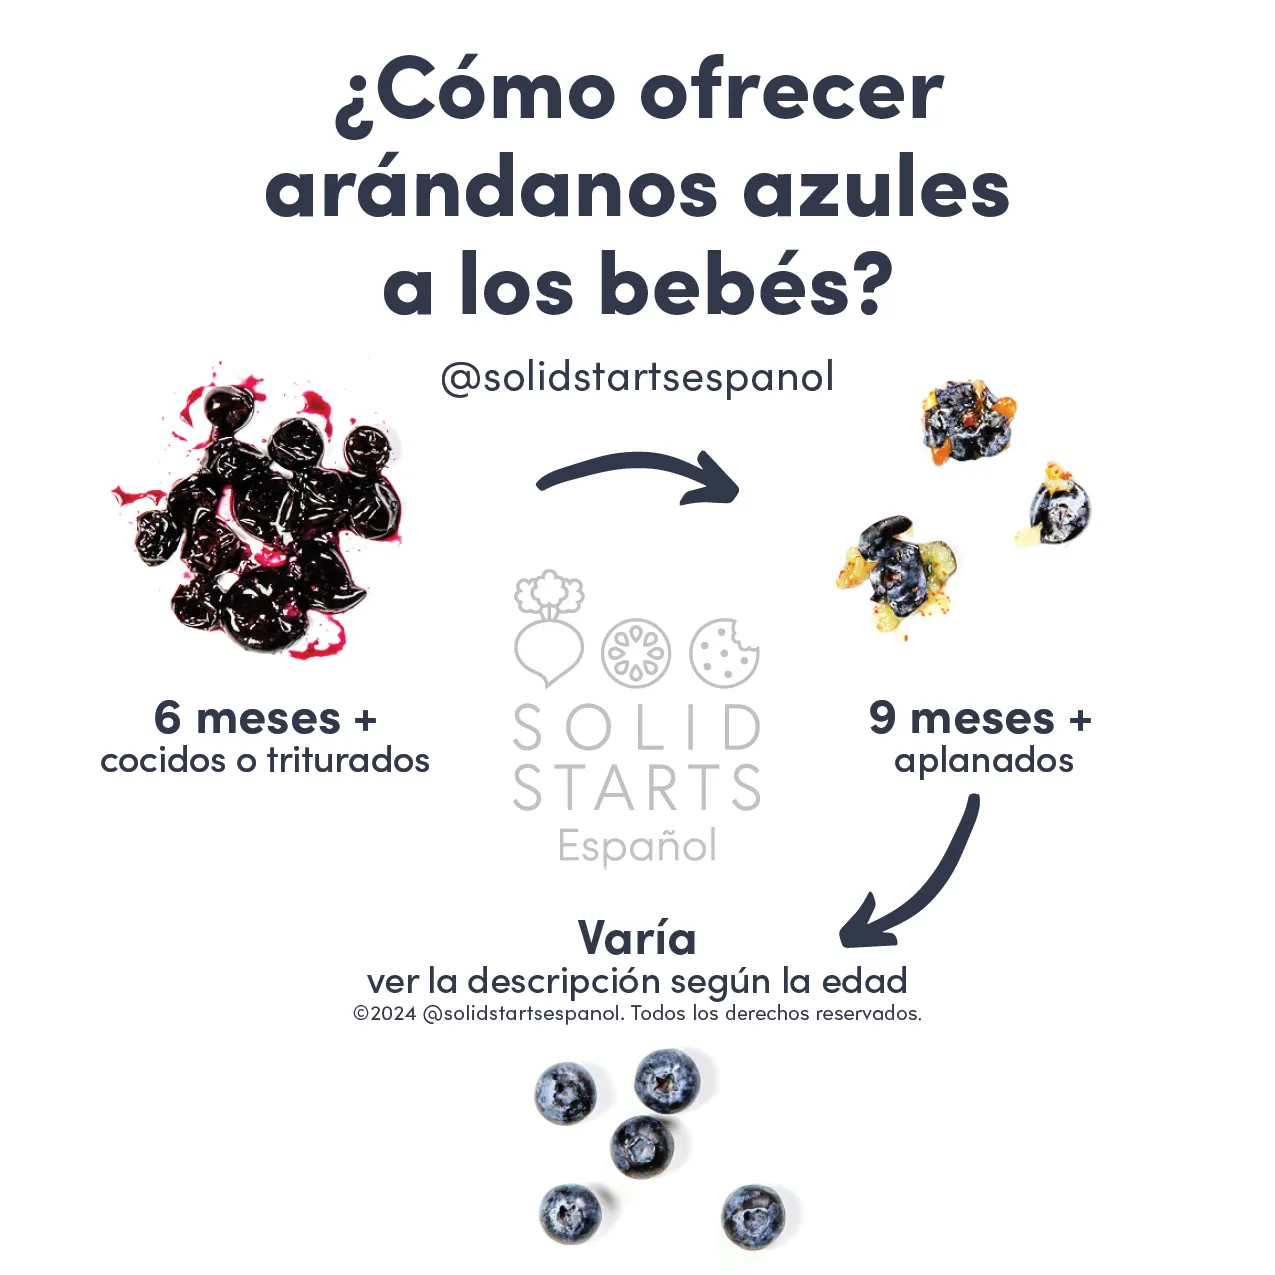 a Solid Starts infographic with the header "How to Serve Blueberries to Babies": cooked/smashed for 6 mos+, flattened for 9 mos+, and varies for whole berries